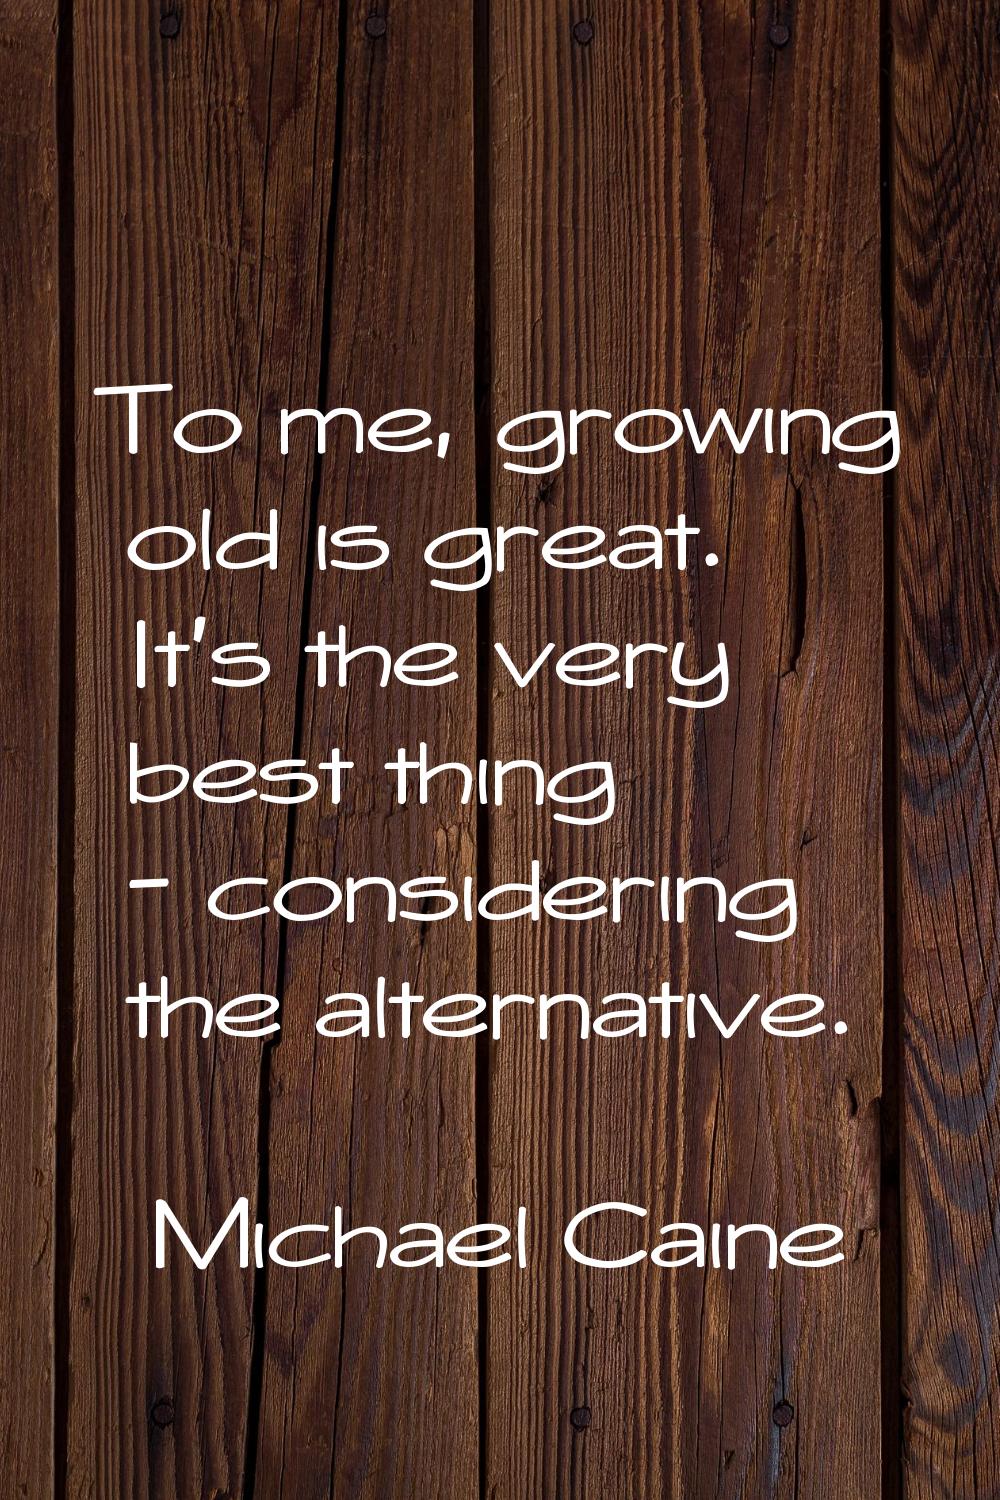 To me, growing old is great. It's the very best thing - considering the alternative.